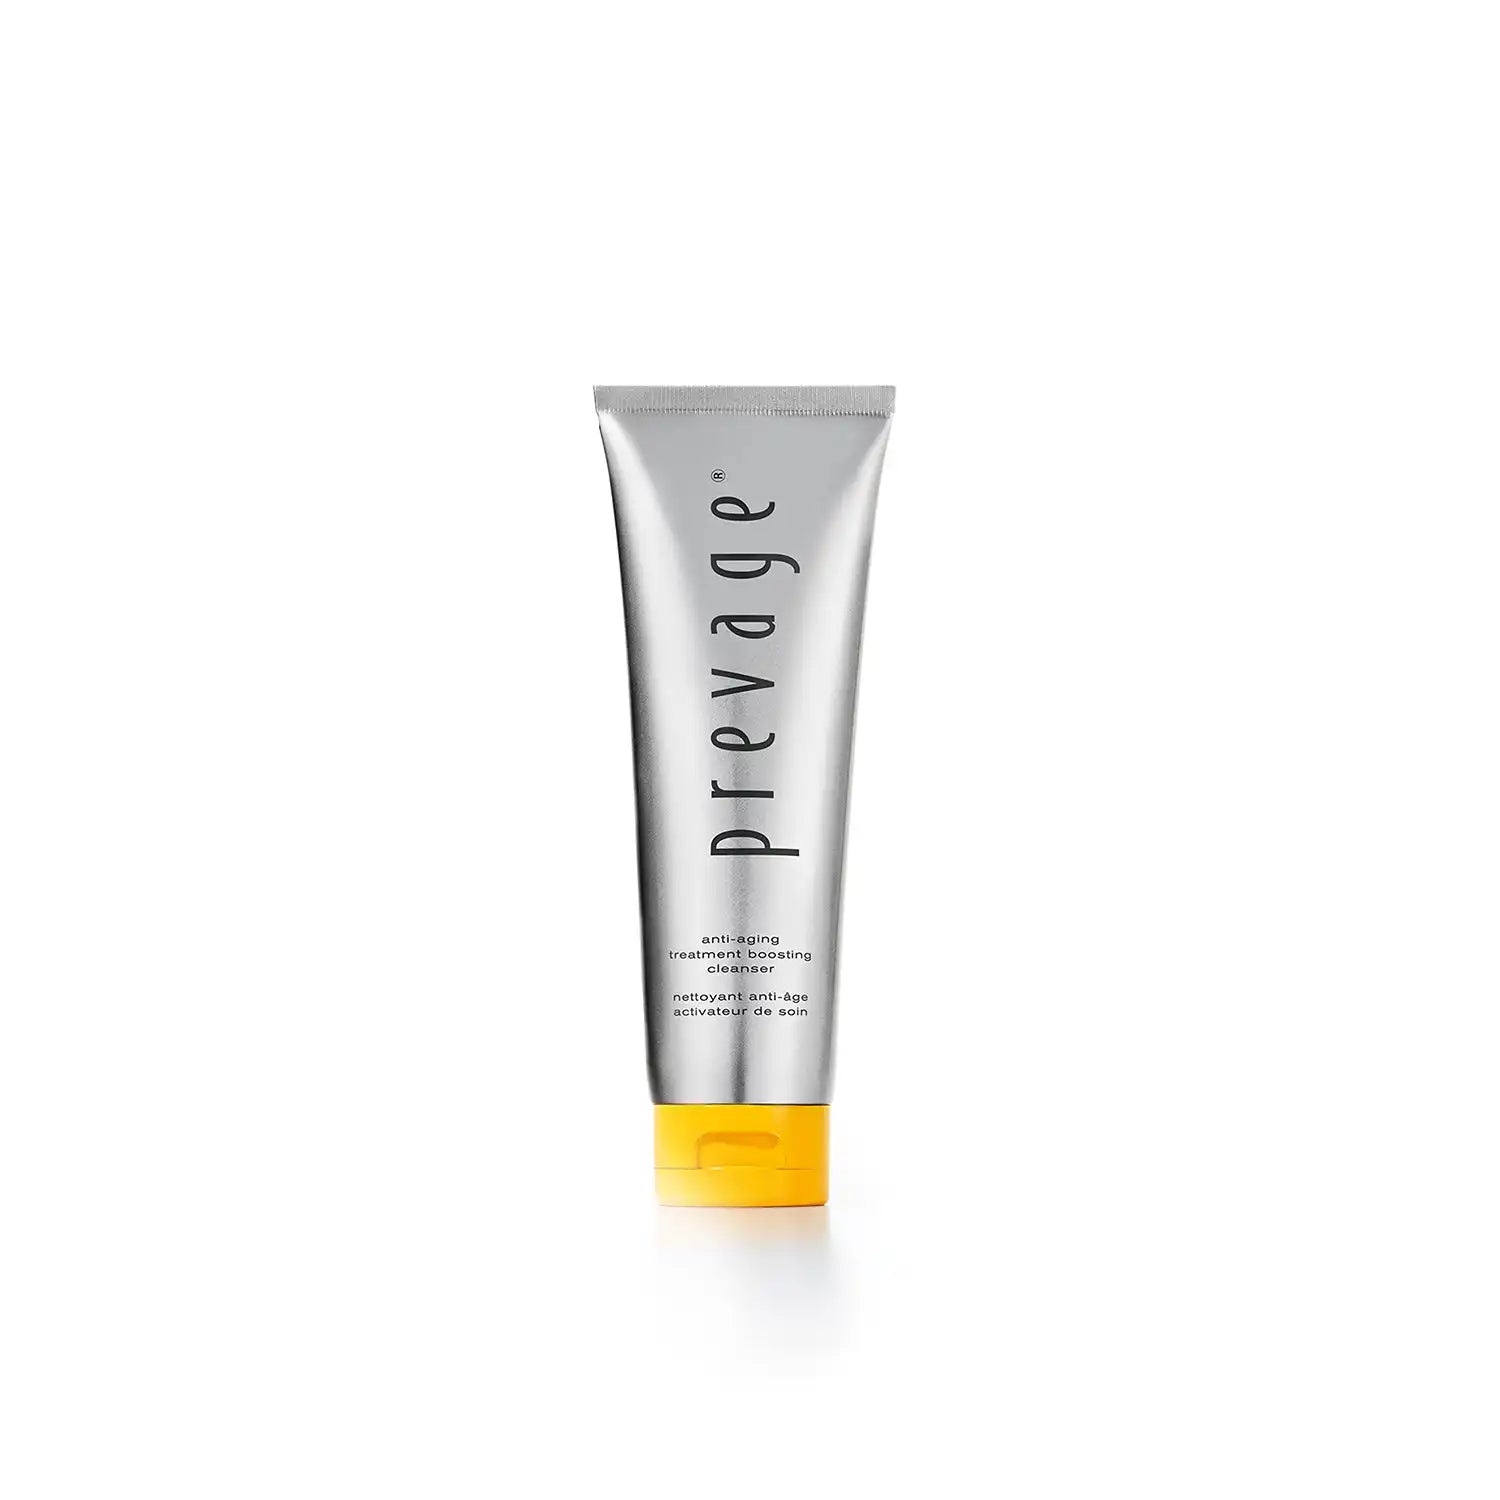 Elizabeth Arden Prevage® Anti-Aging Treatment Boosting Cleanser 125ml 1 Shaws Department Stores